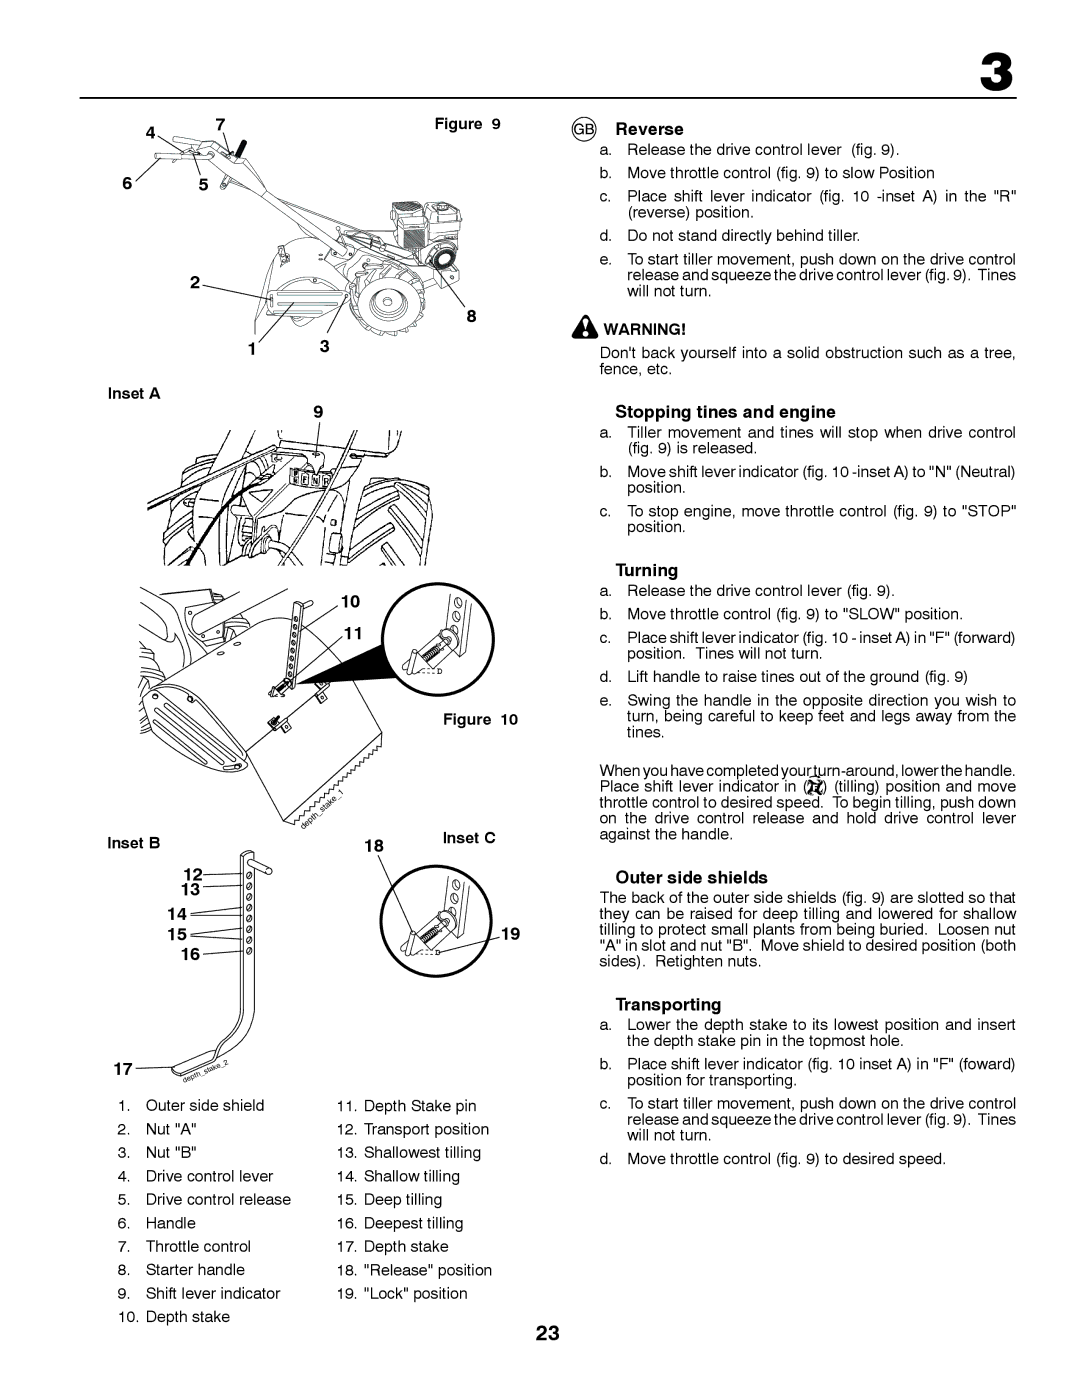 McCulloch MRT6 instruction manual Reverse, Stopping tines and engine, Turning, Outer side shields, Transporting 